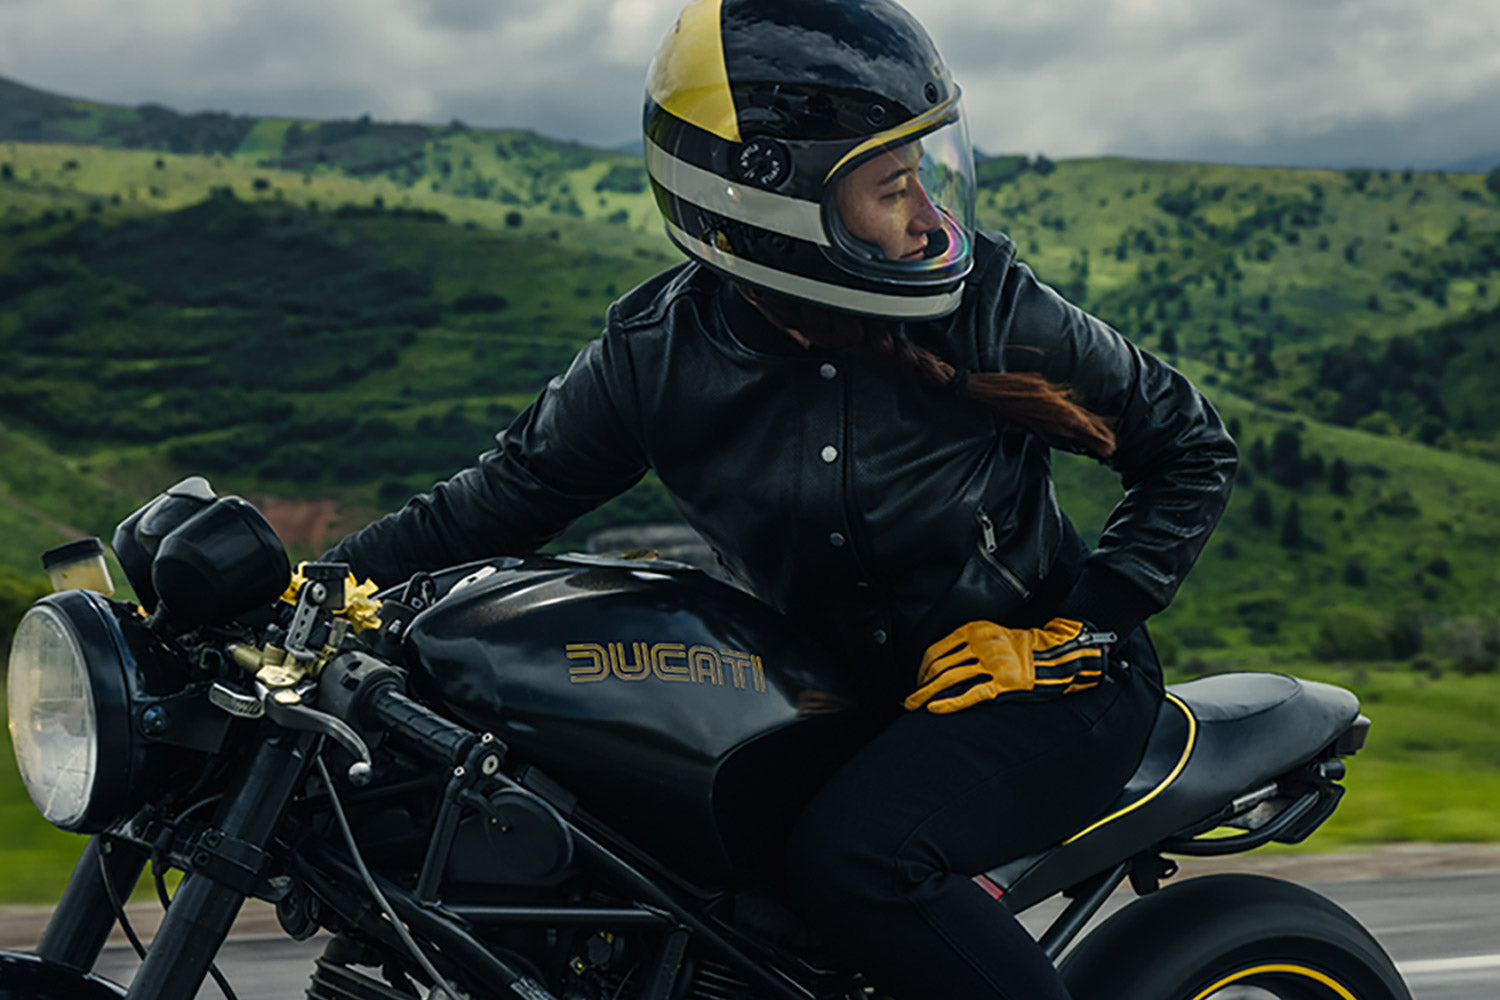 Fashionable, stylish, and safe motorcycle jacket for the urban woman